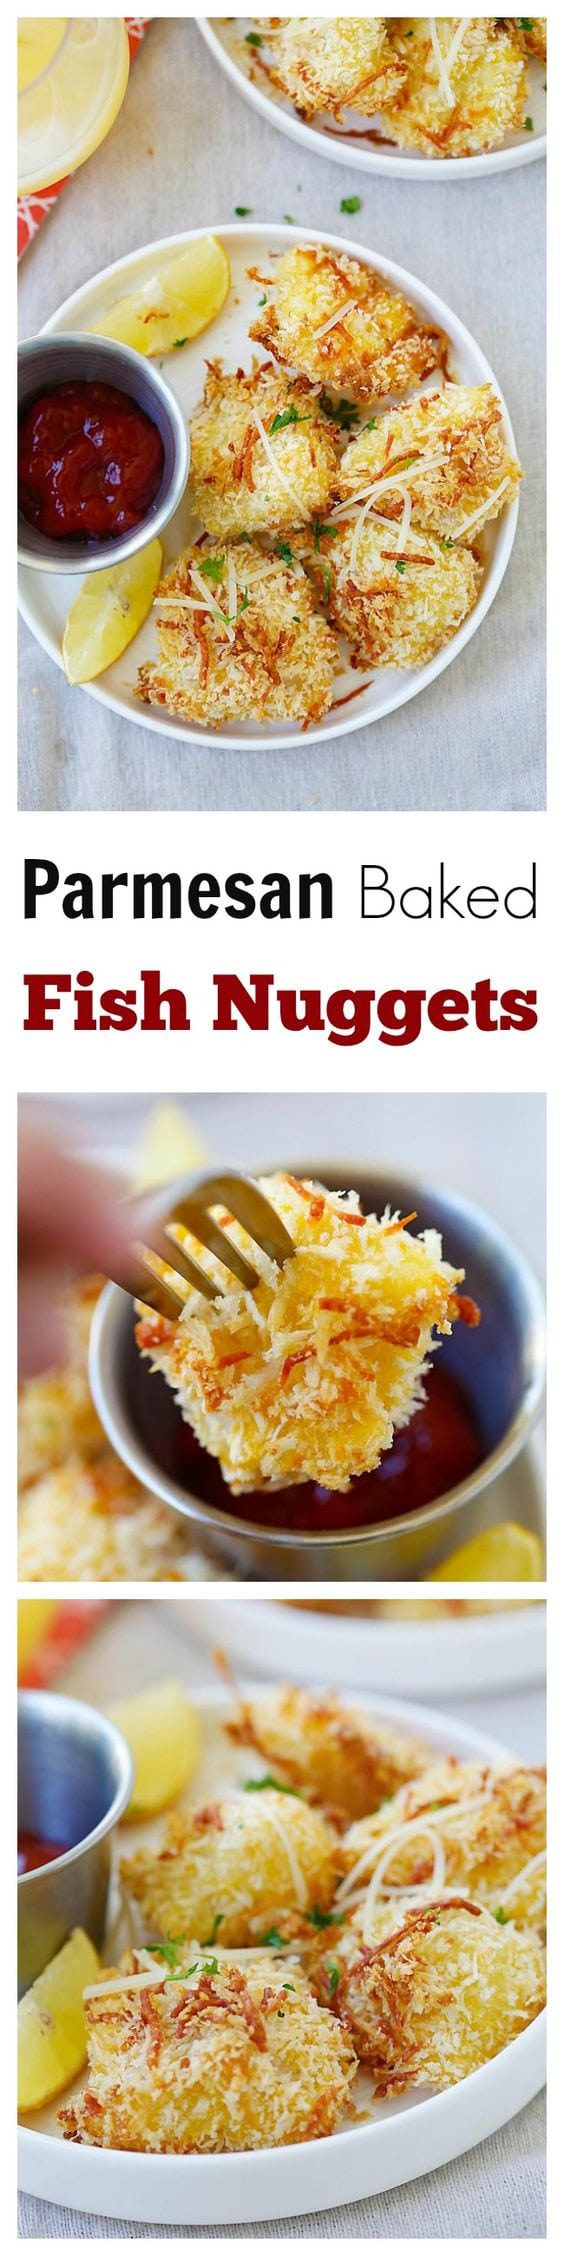 Parmesan Baked Fish Nuggets - crispy fish nuggets with cod fish and no frying. SO easy and delicious, perfect for kids and the entire family!! | rasamalaysia.com